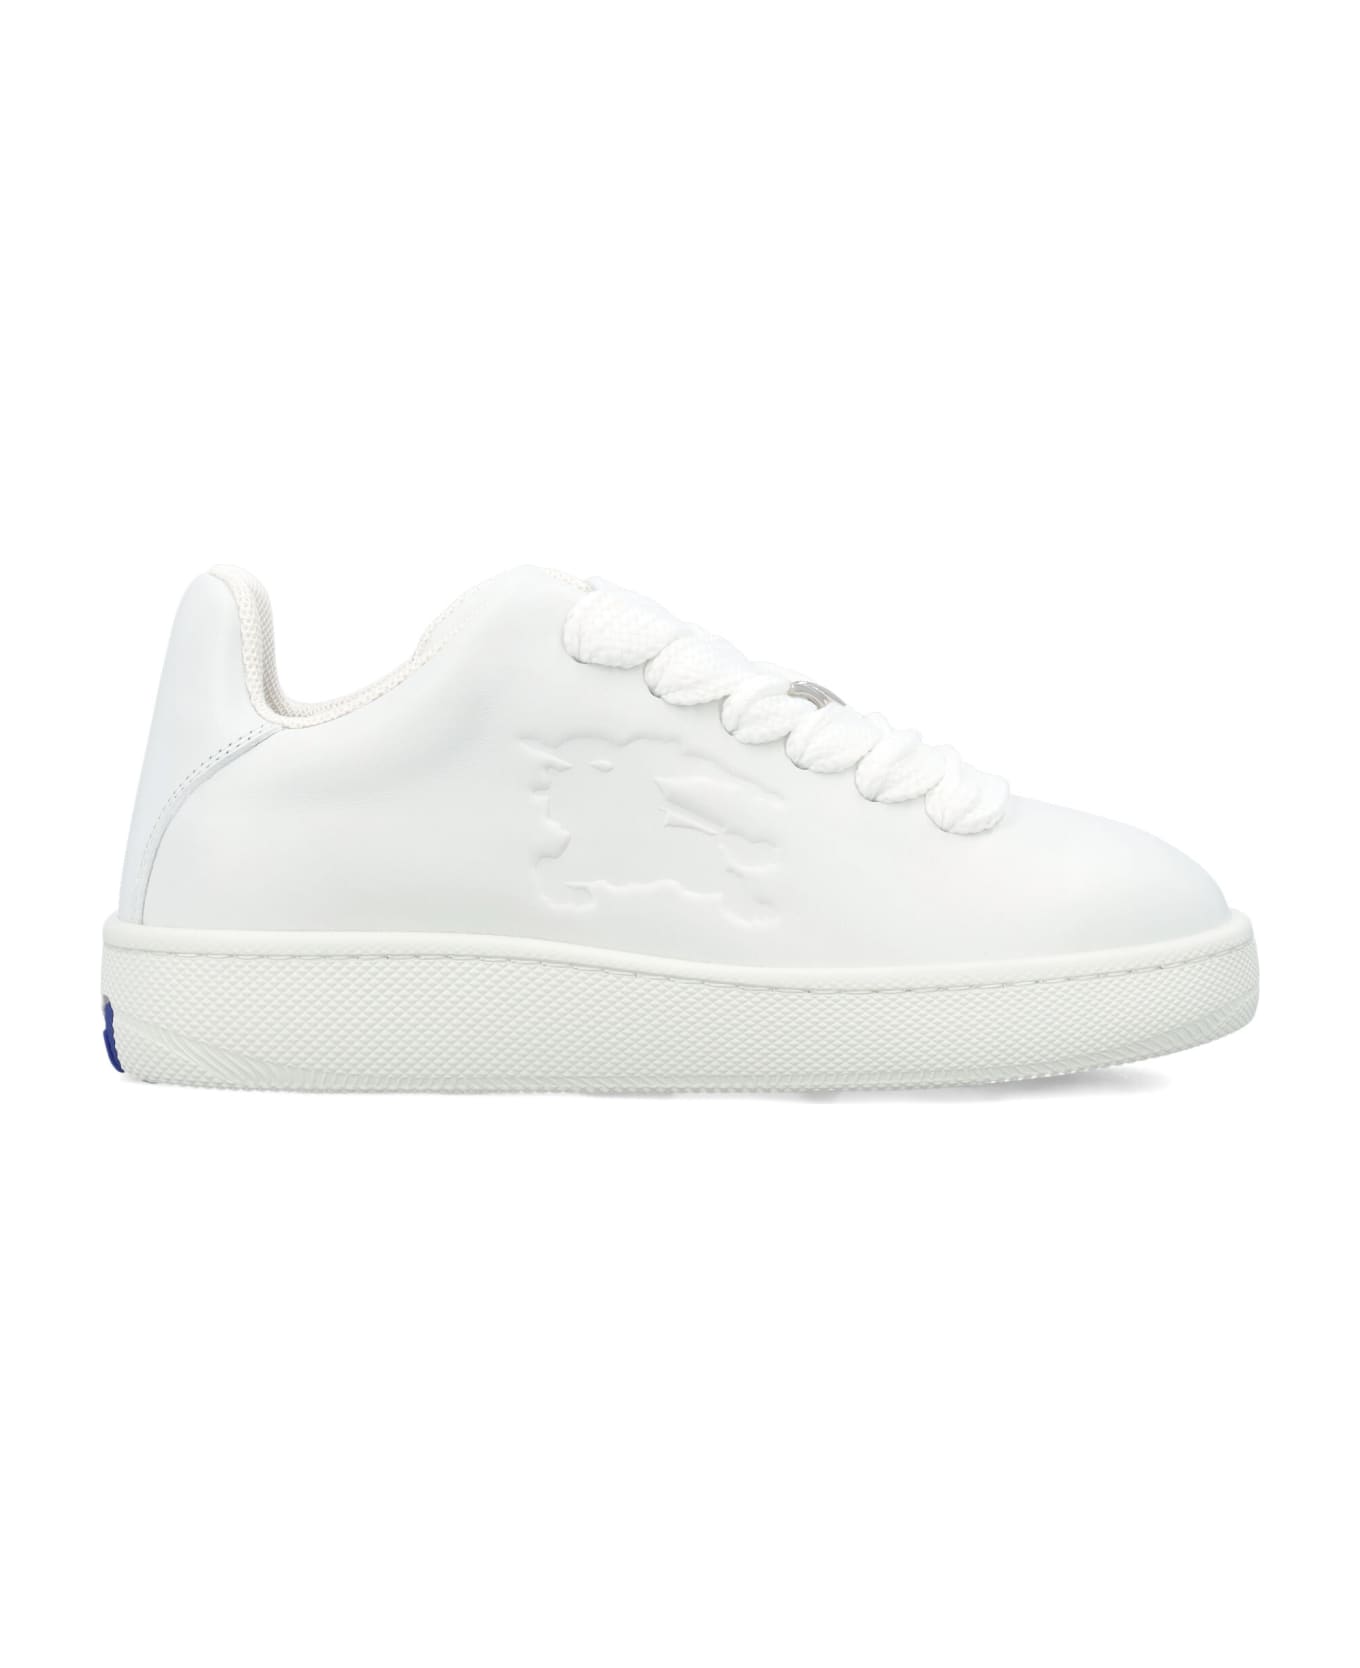 Burberry London Leather Box Sneakers - WHITE スニーカー